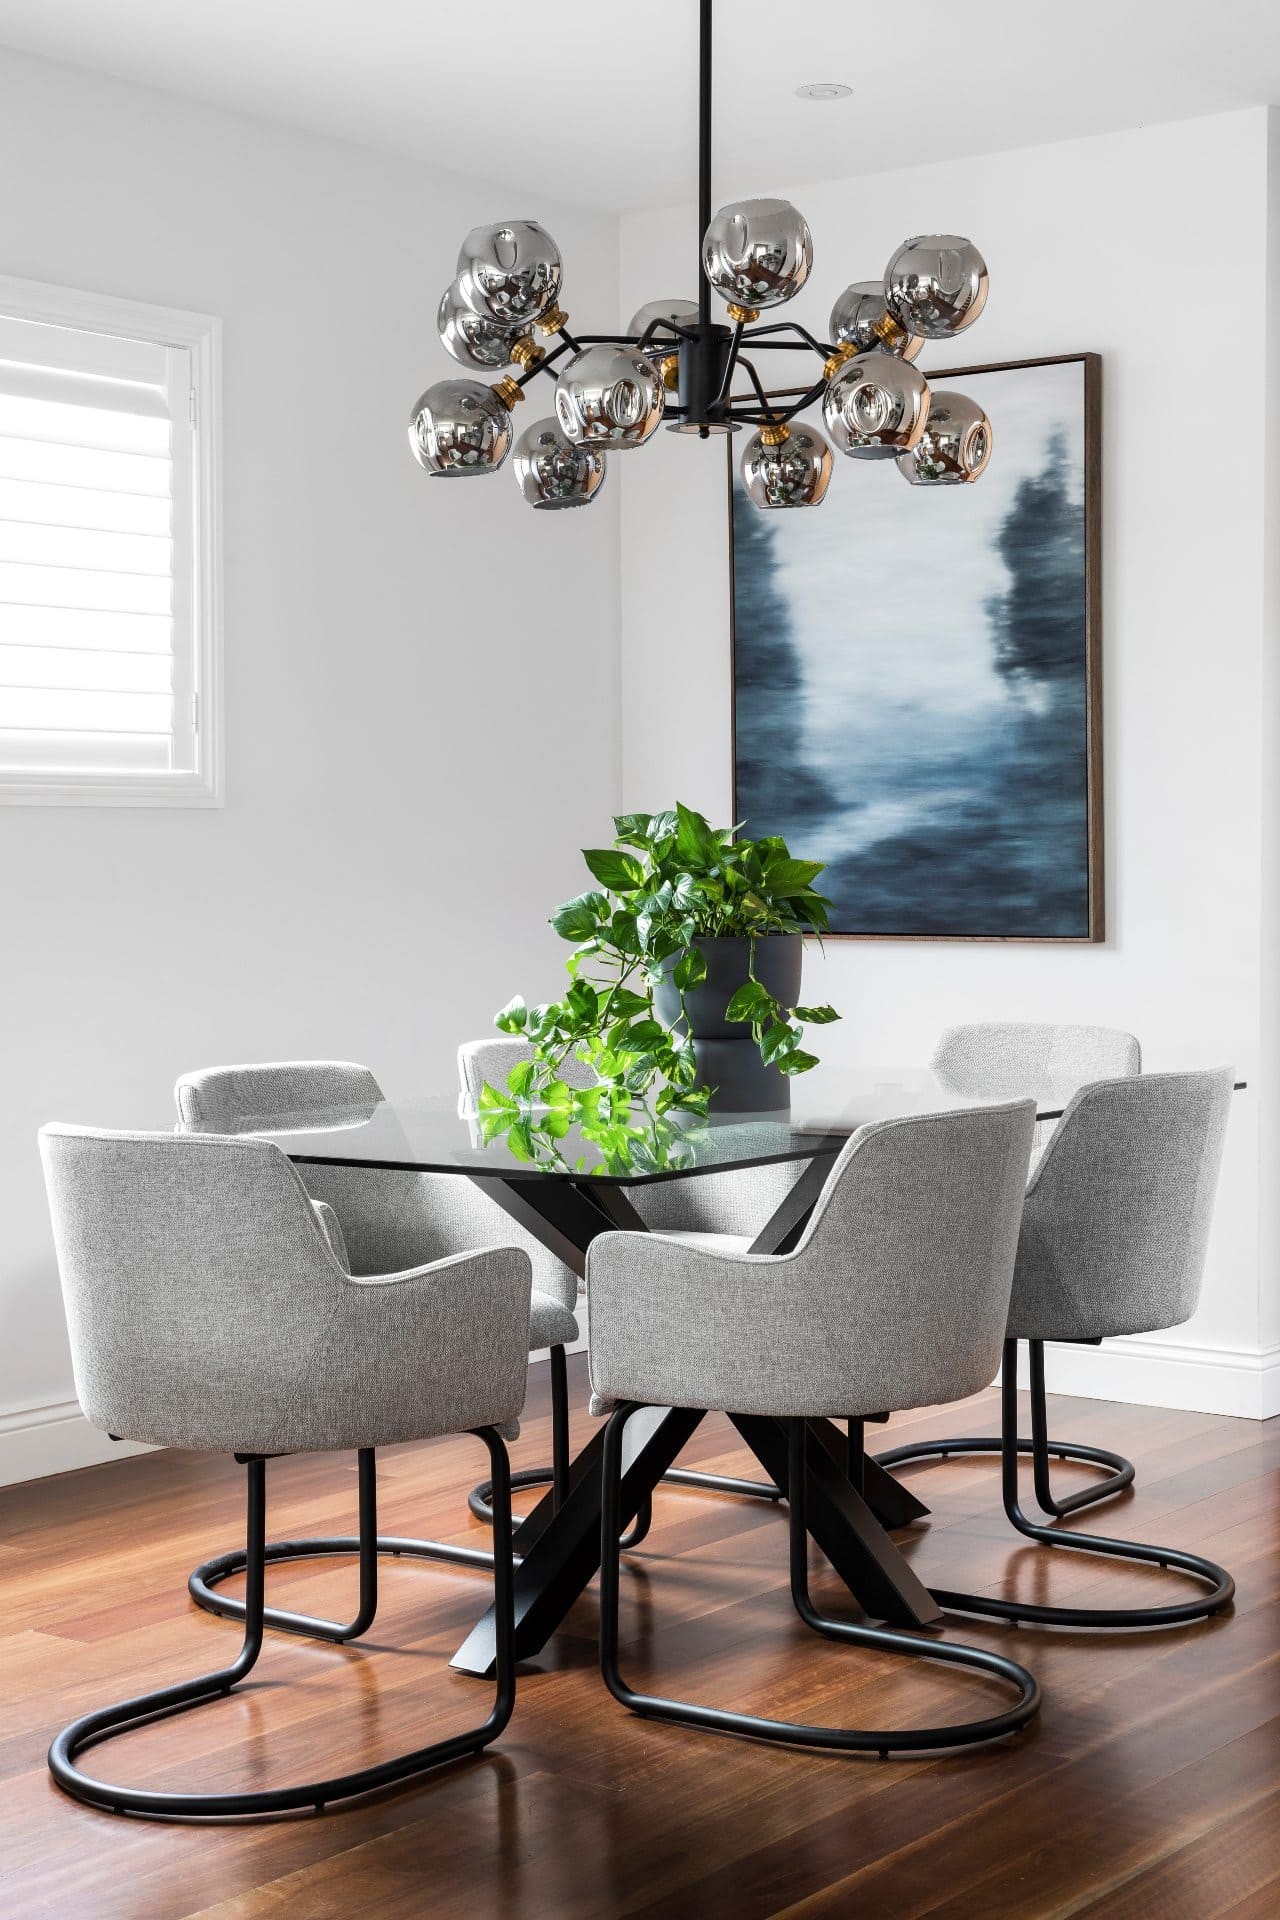 modern dining room design with glass rectangle dining table grey upholstered chairs and mid century glass pendant light